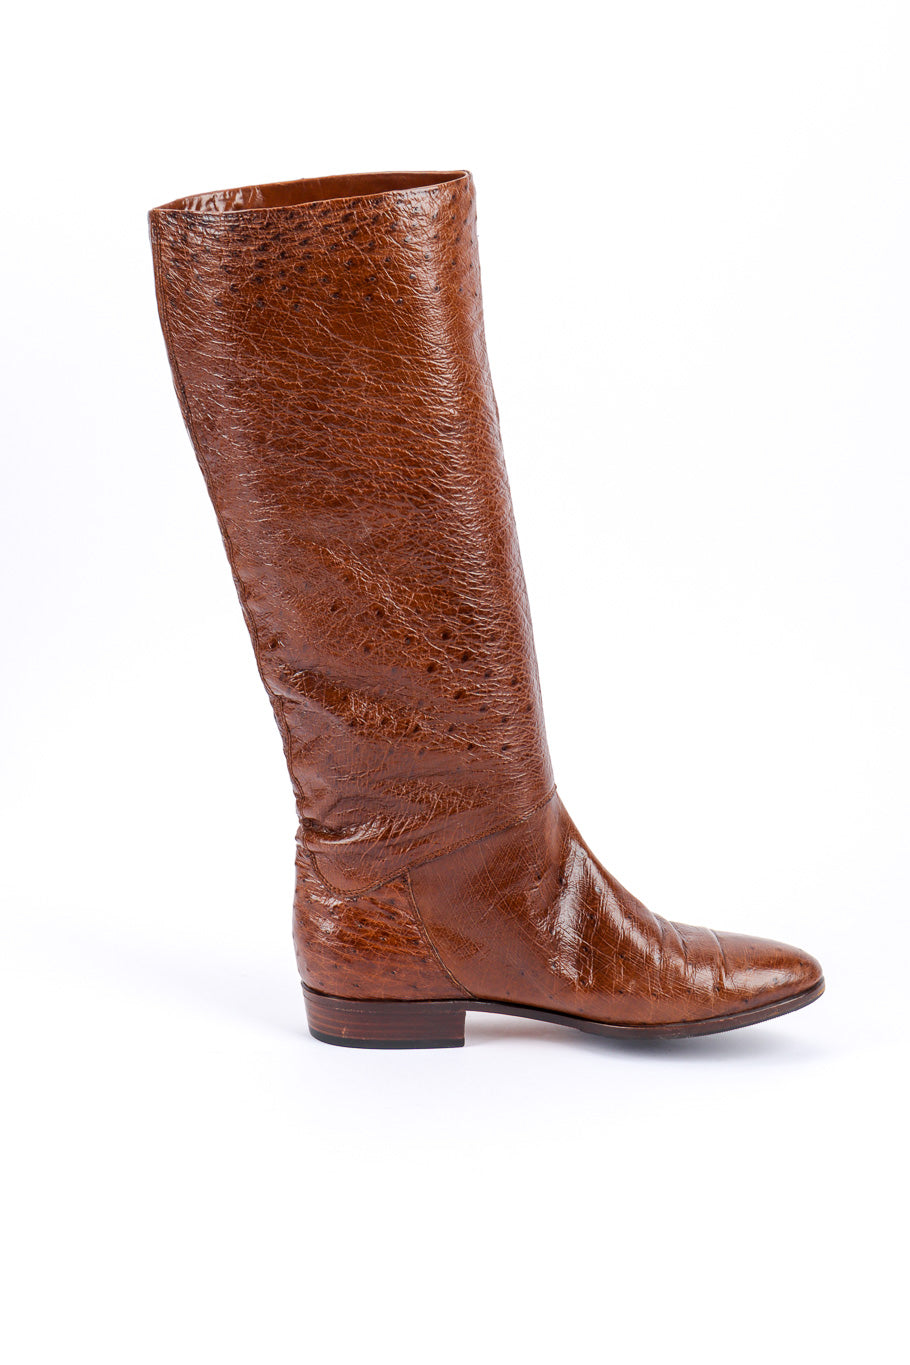 Vintage Gucci Brown Ostrich Leather Riding Boot left boot inner view @recessla